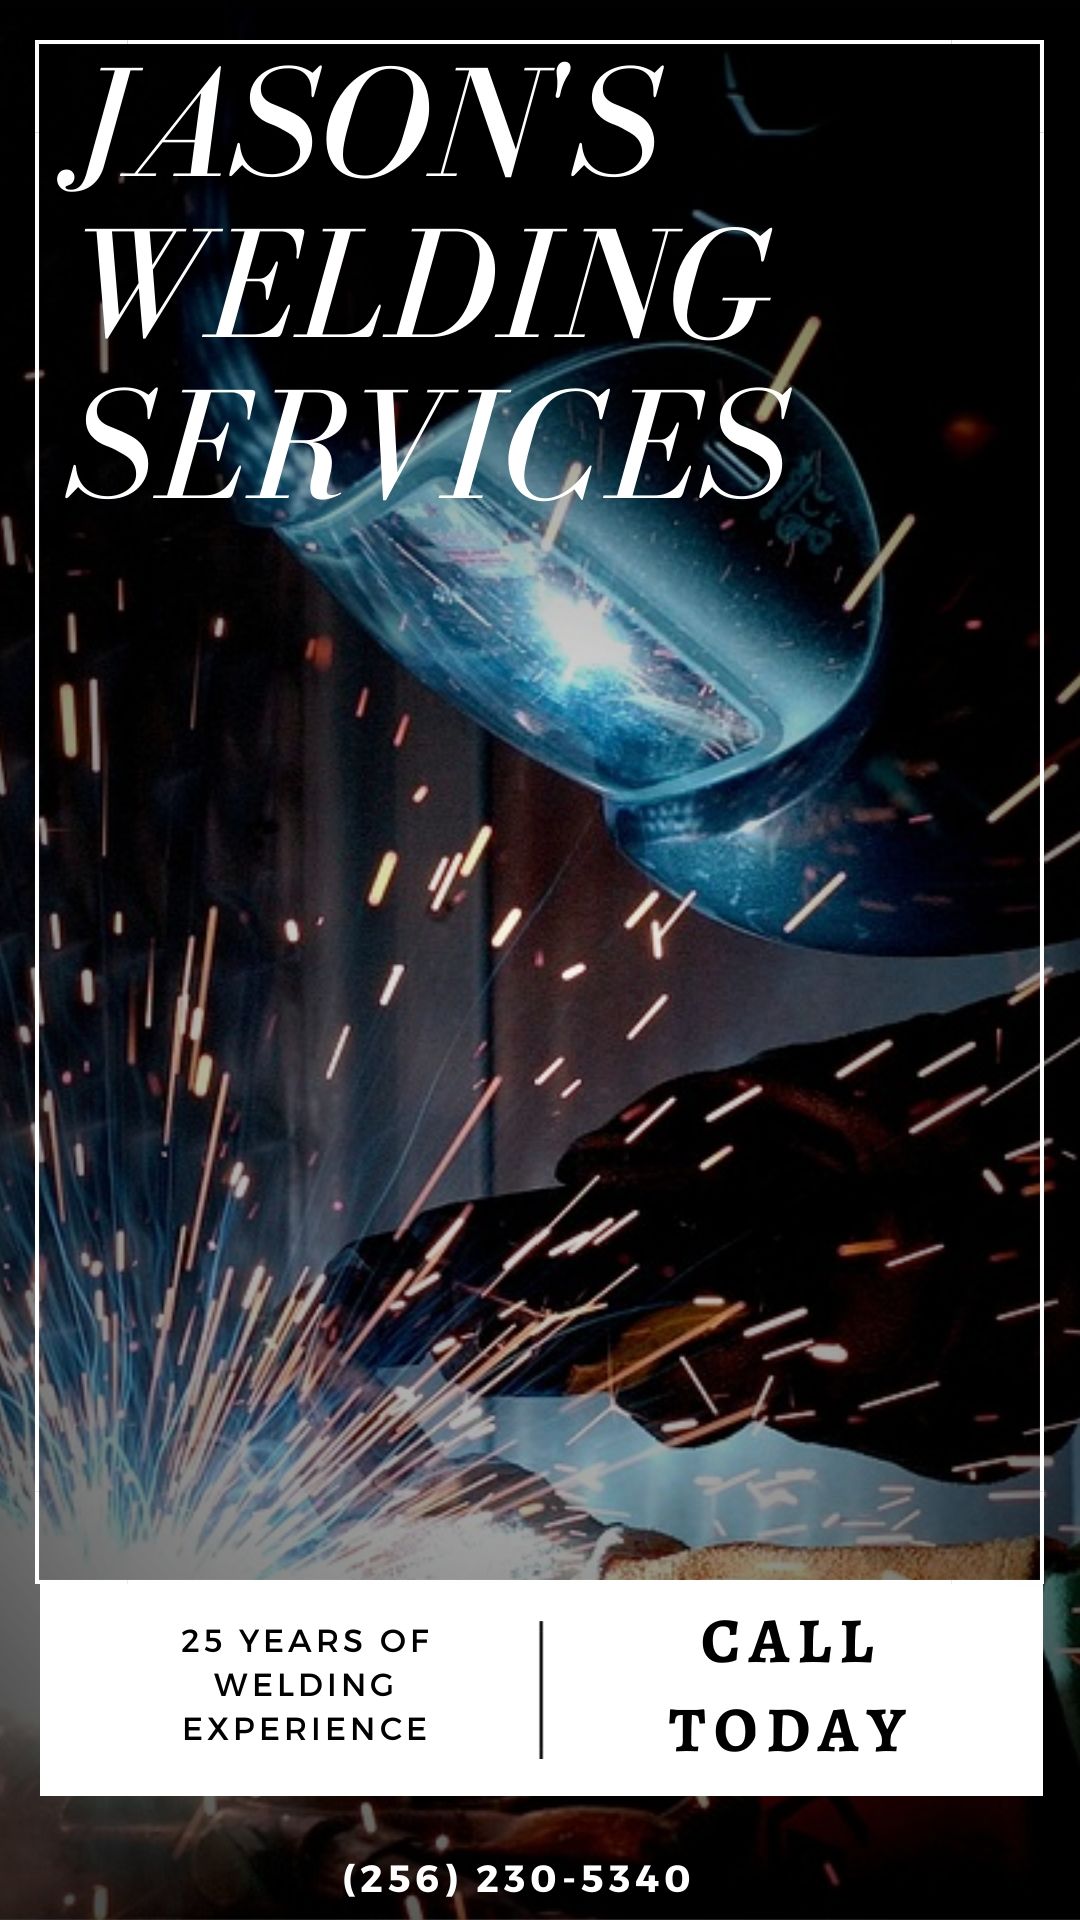 Welding Services, Mobile Welding, Welding, Fabrication Of All Types, Trailer Parts